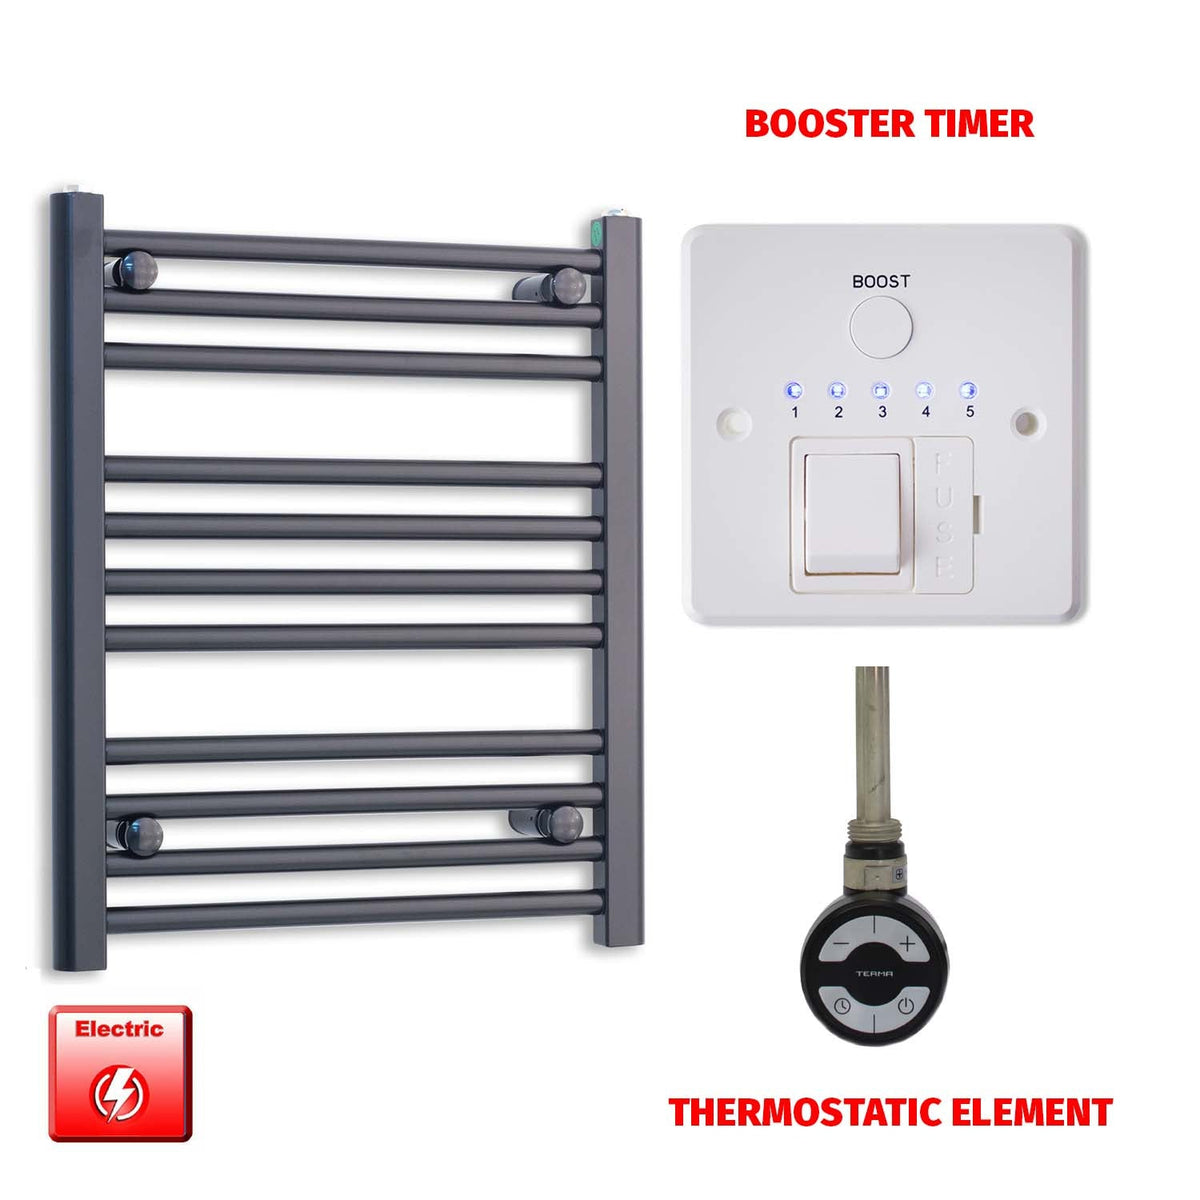 600 x 500 Flat Black Pre-Filled Electric Heated Towel Radiator HTR MOA Thermostatic Booster Timer